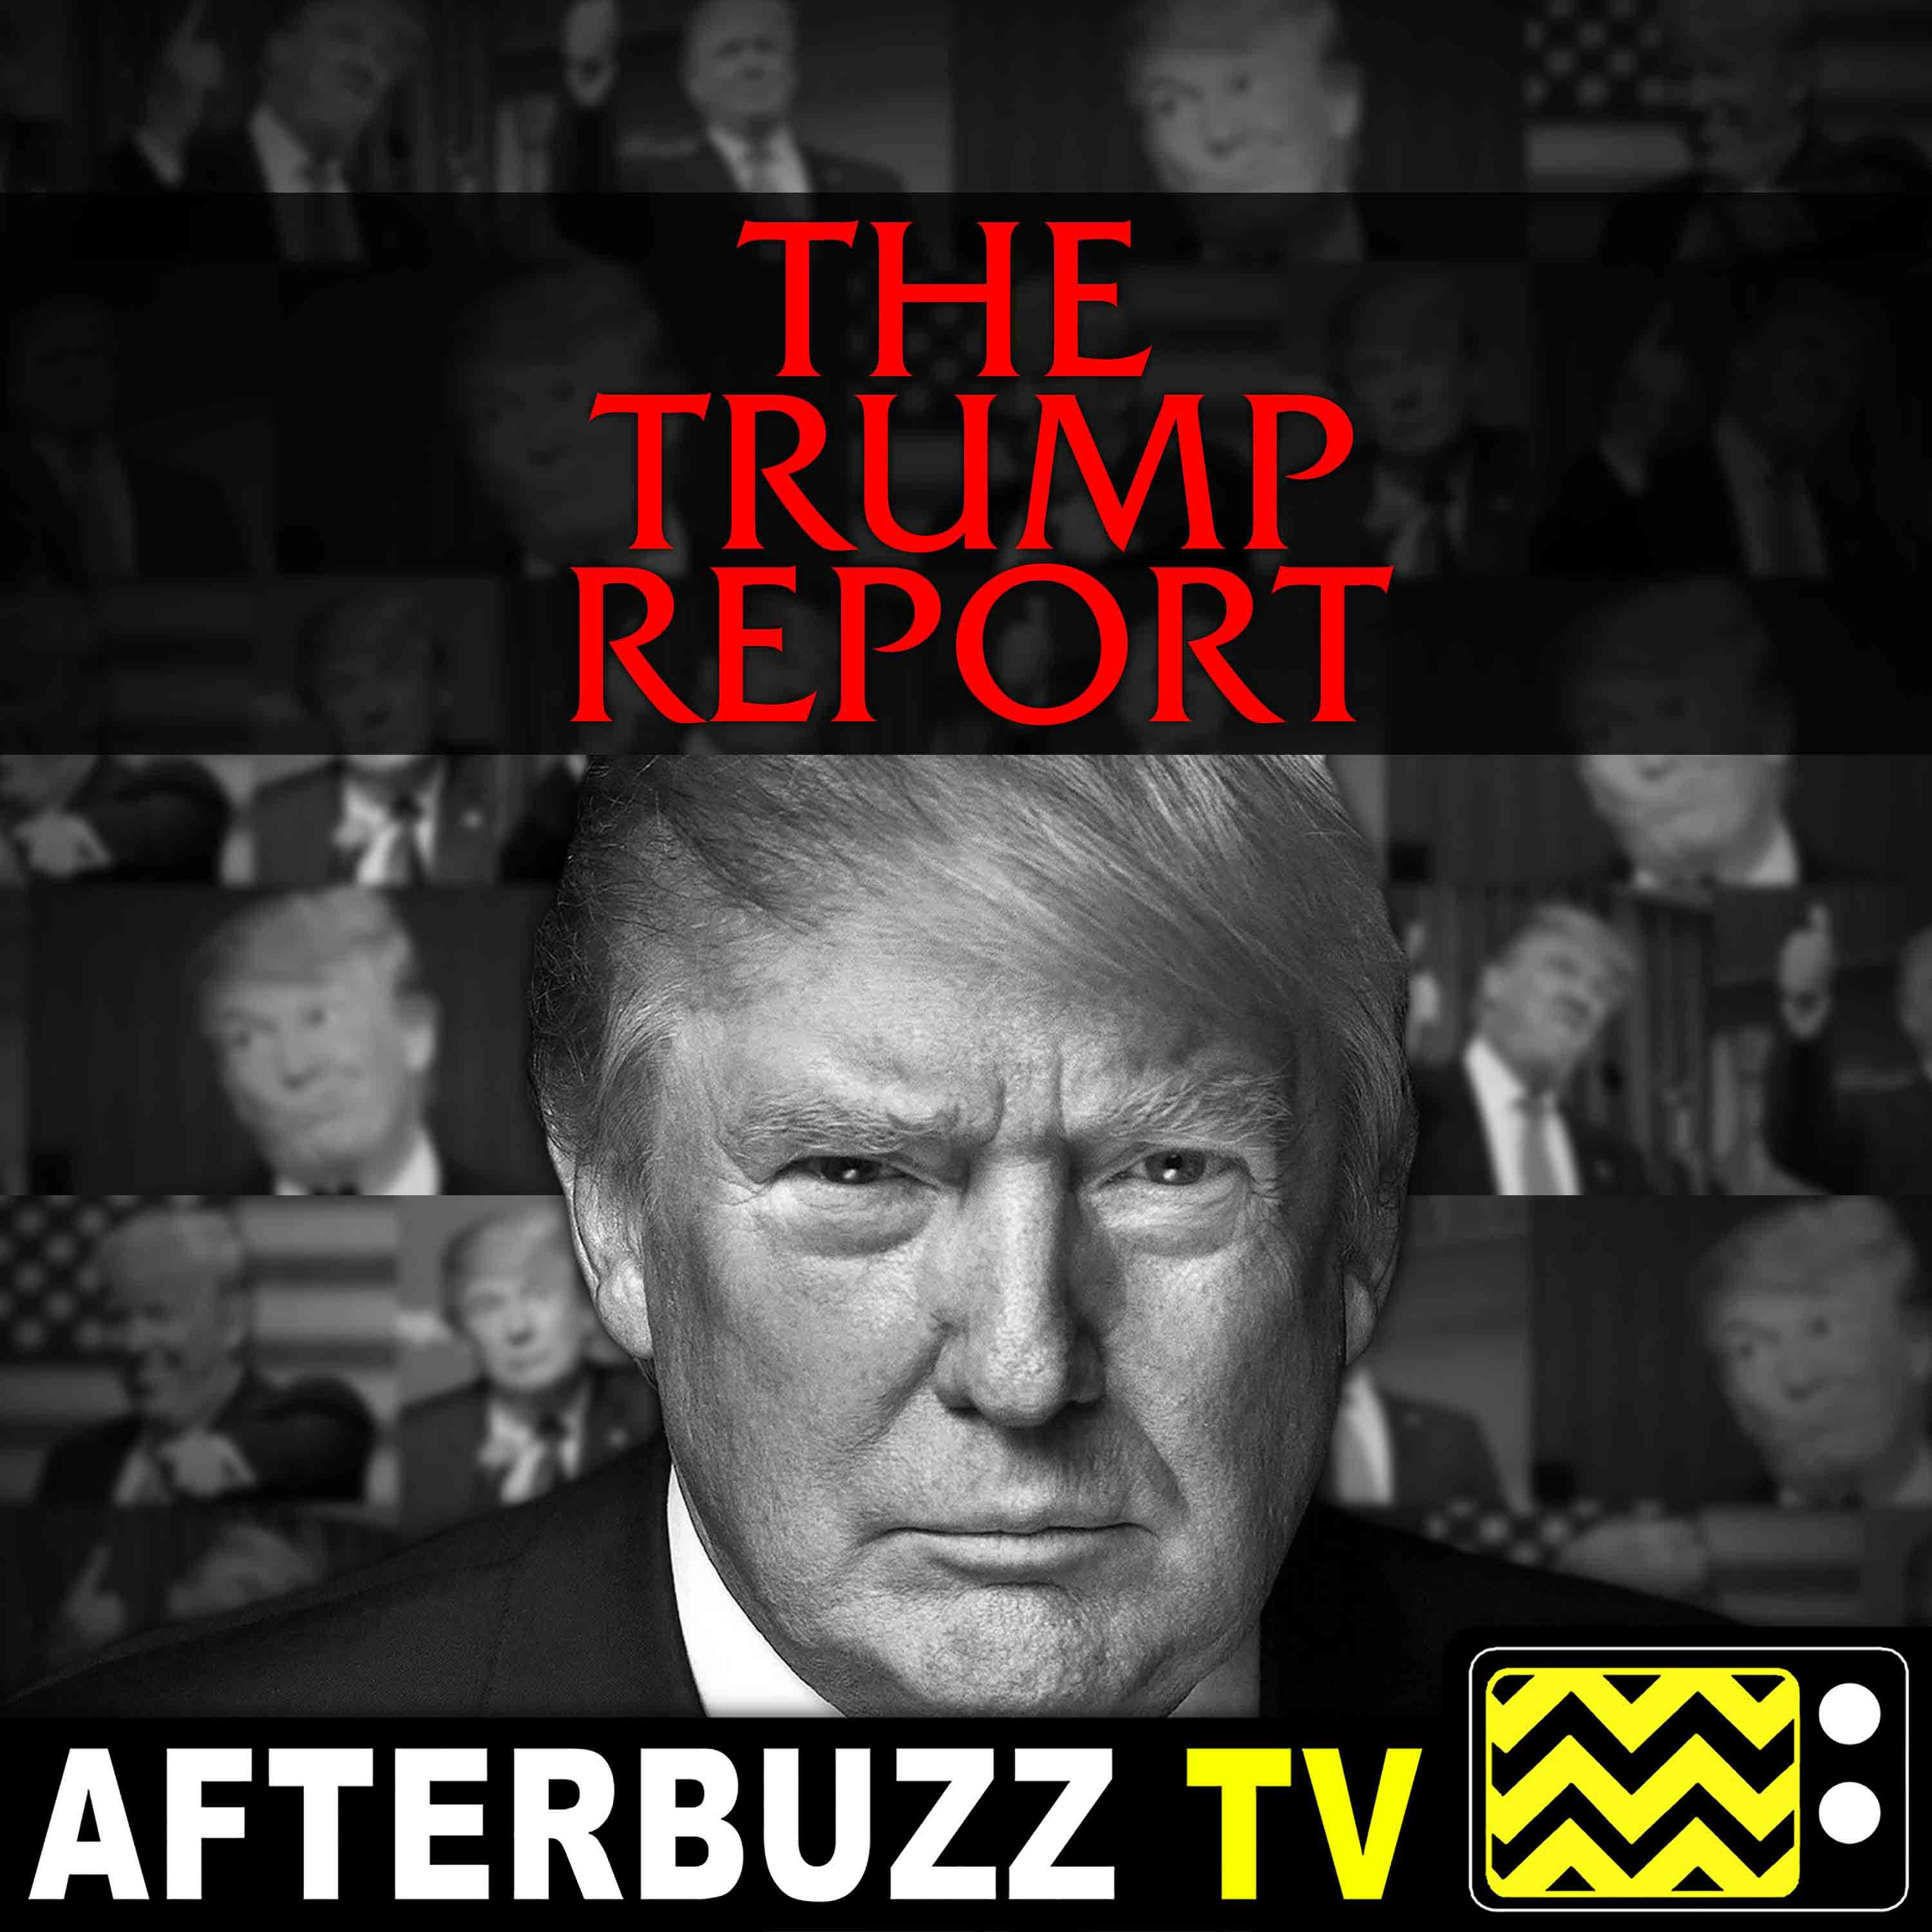 Democratic Debate 11/20/2019 and Impeachment Hearings The Trump Report | AfterBuzz TV